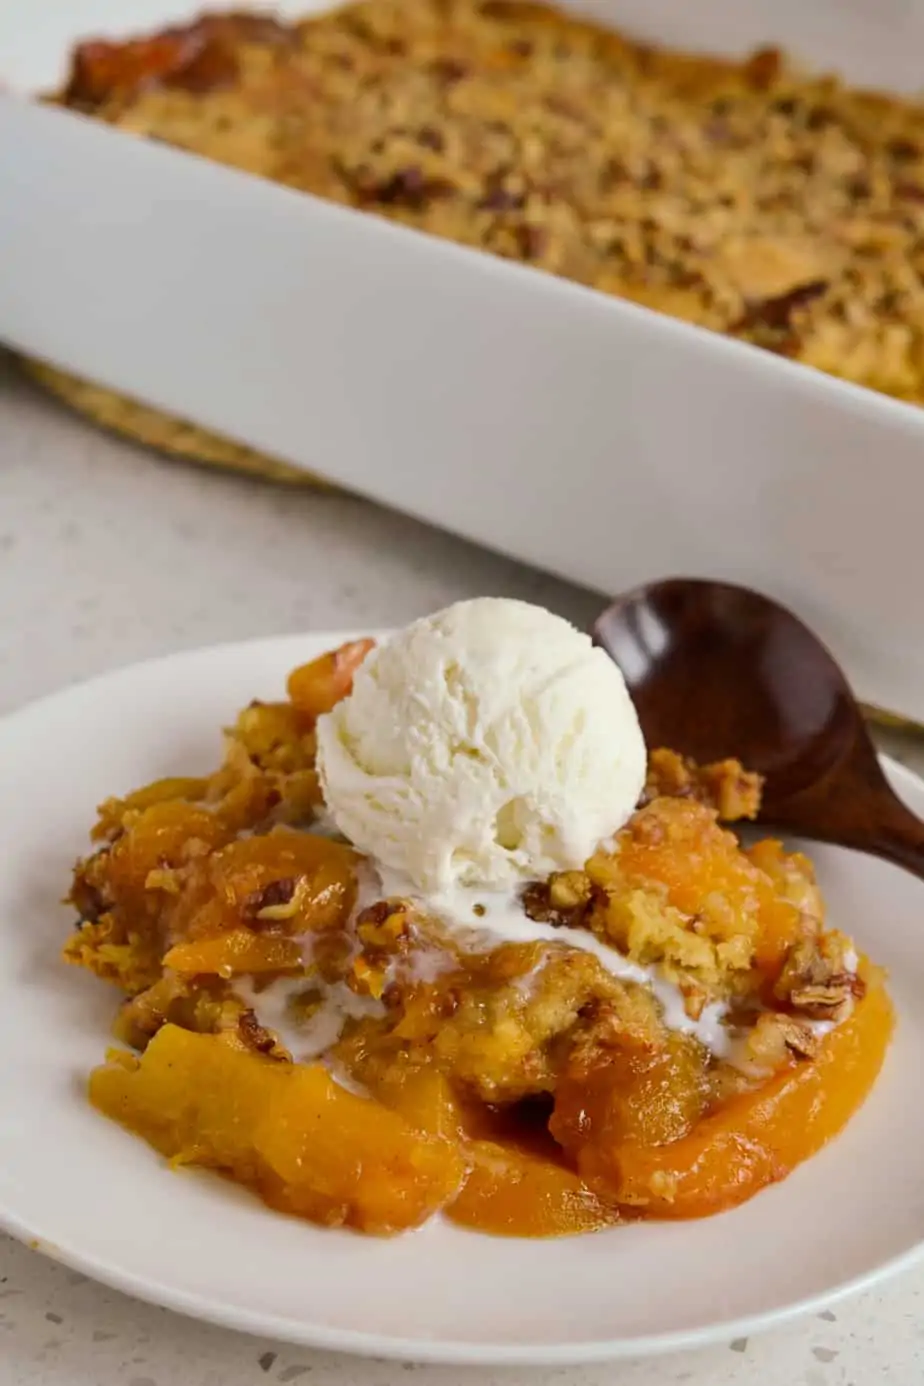 This Peach Dump Cake is made with fresh or frozen peaches giving it spectacular flavor and texture.